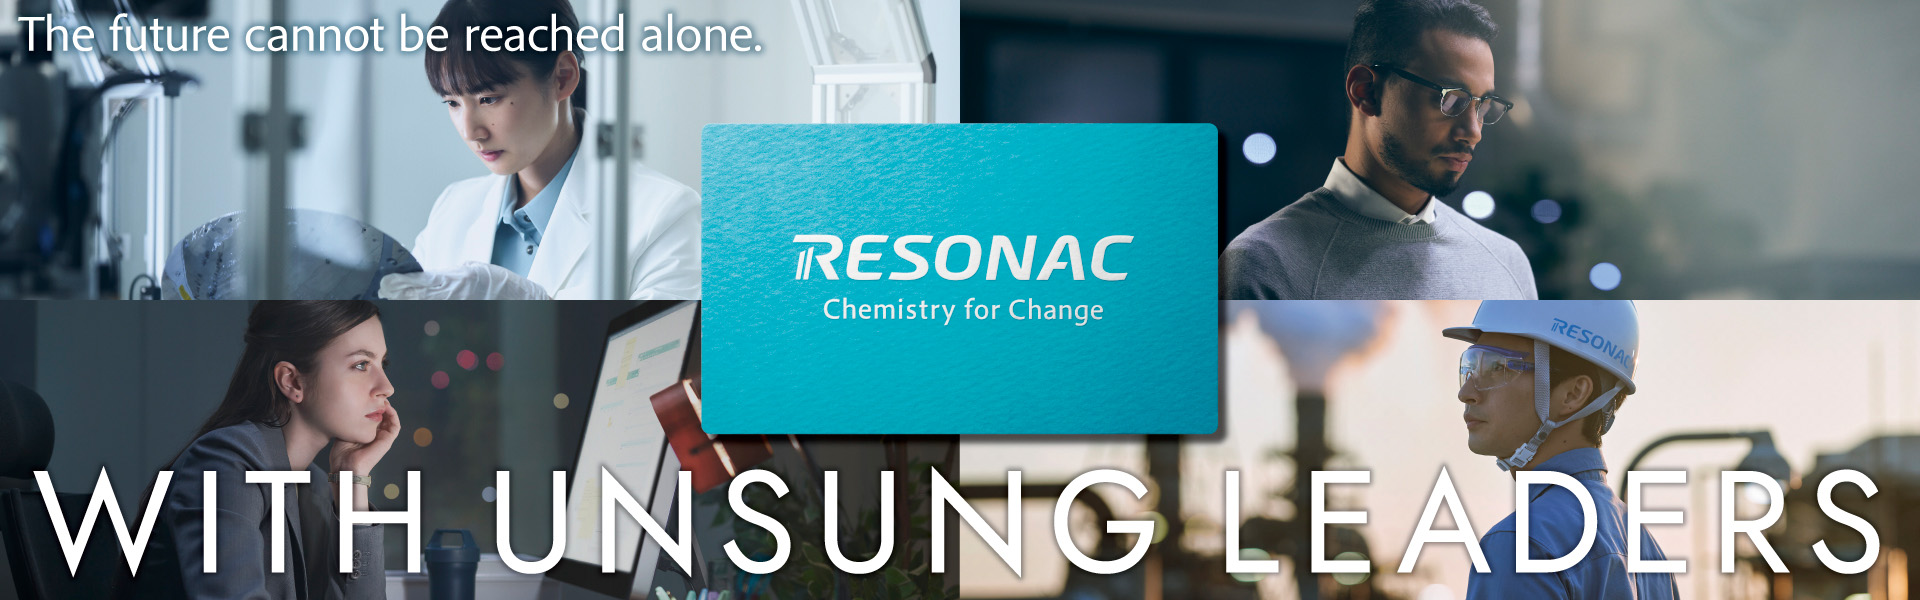 RESONAC Chemistry for Change The future cannot be reached alone. WITH UNSUNG LEADERS